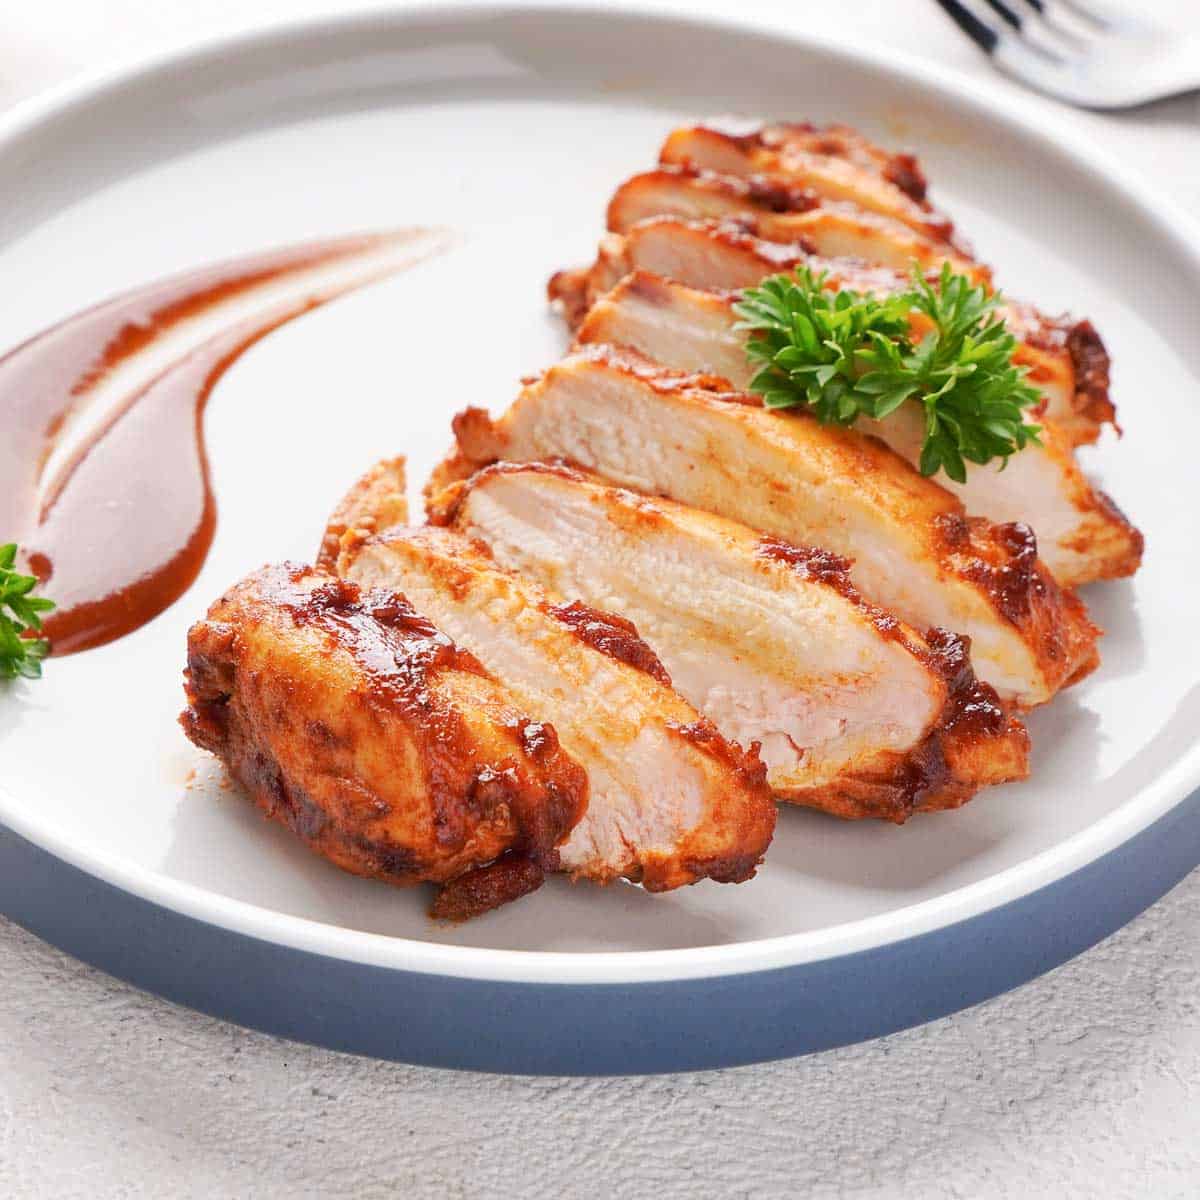 sliced barbecue chicken breast on white plate with extra sauce garnish